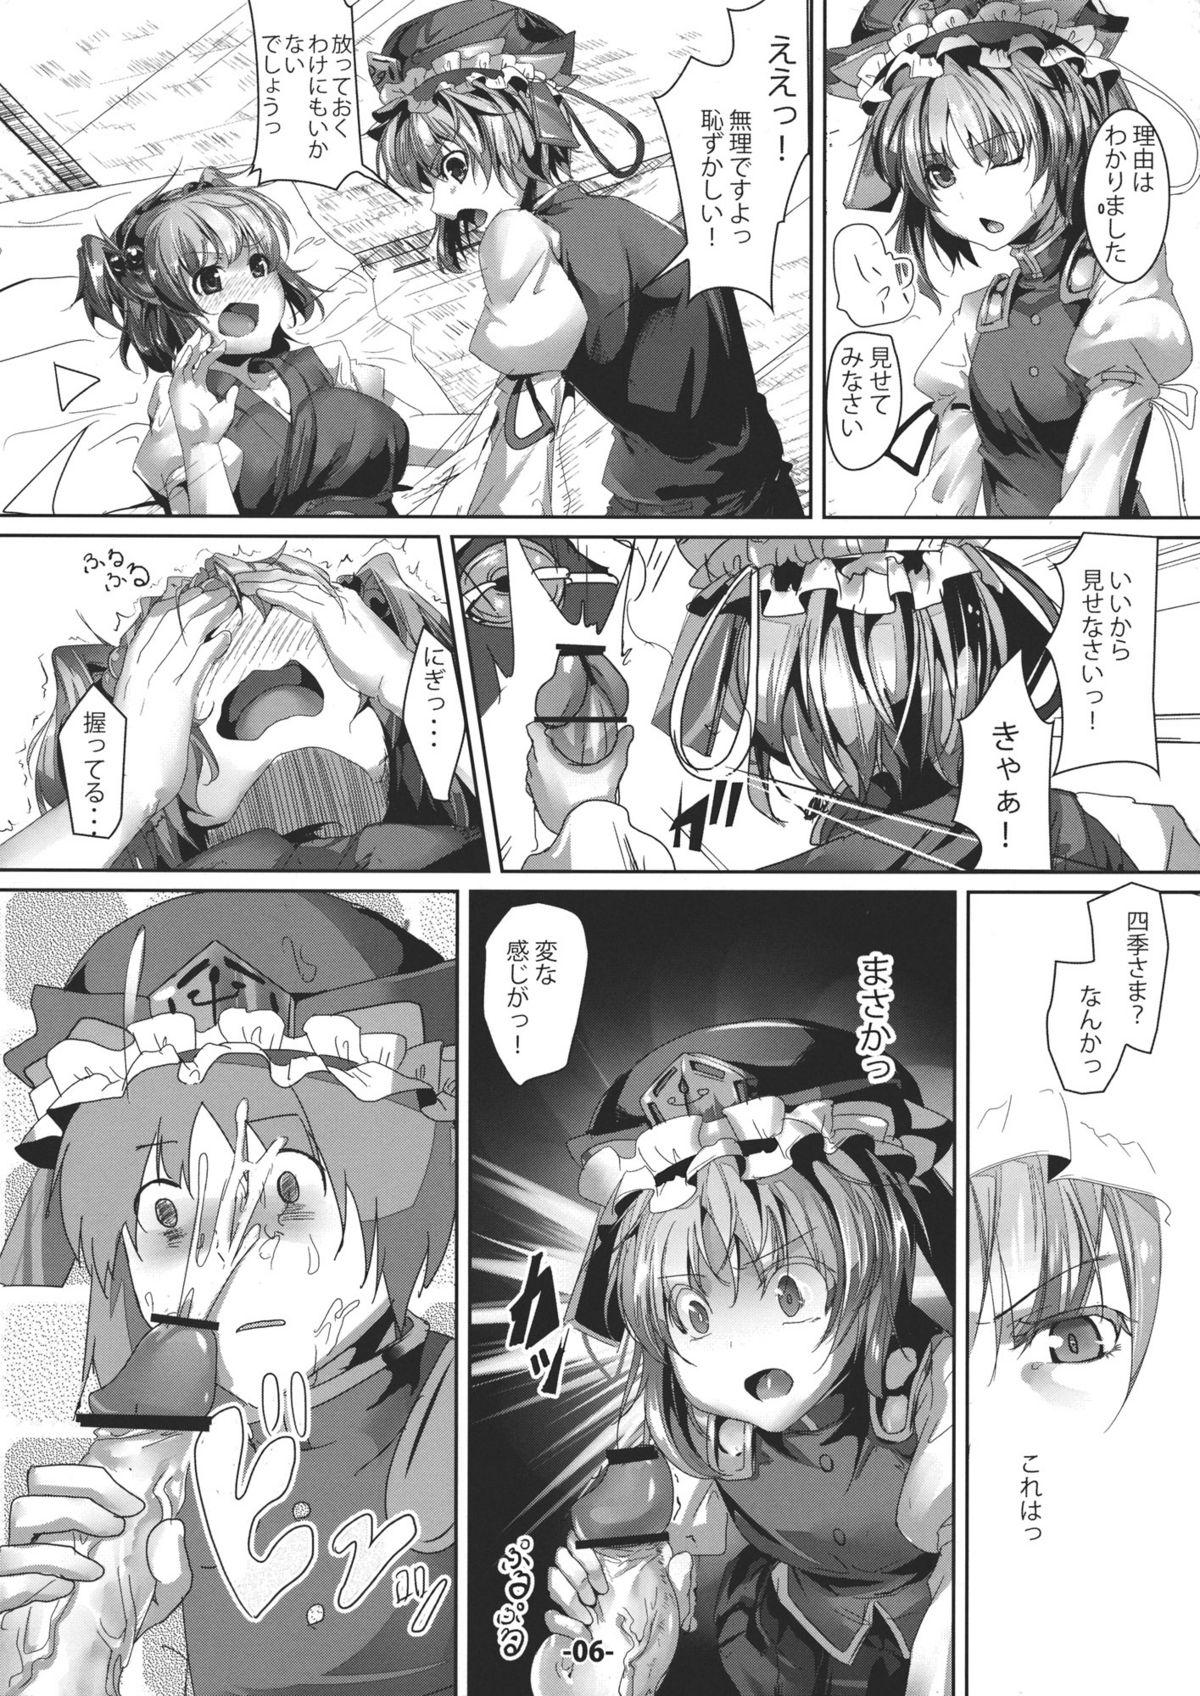 Japan Love of Life - Touhou project Dildos - Page 6